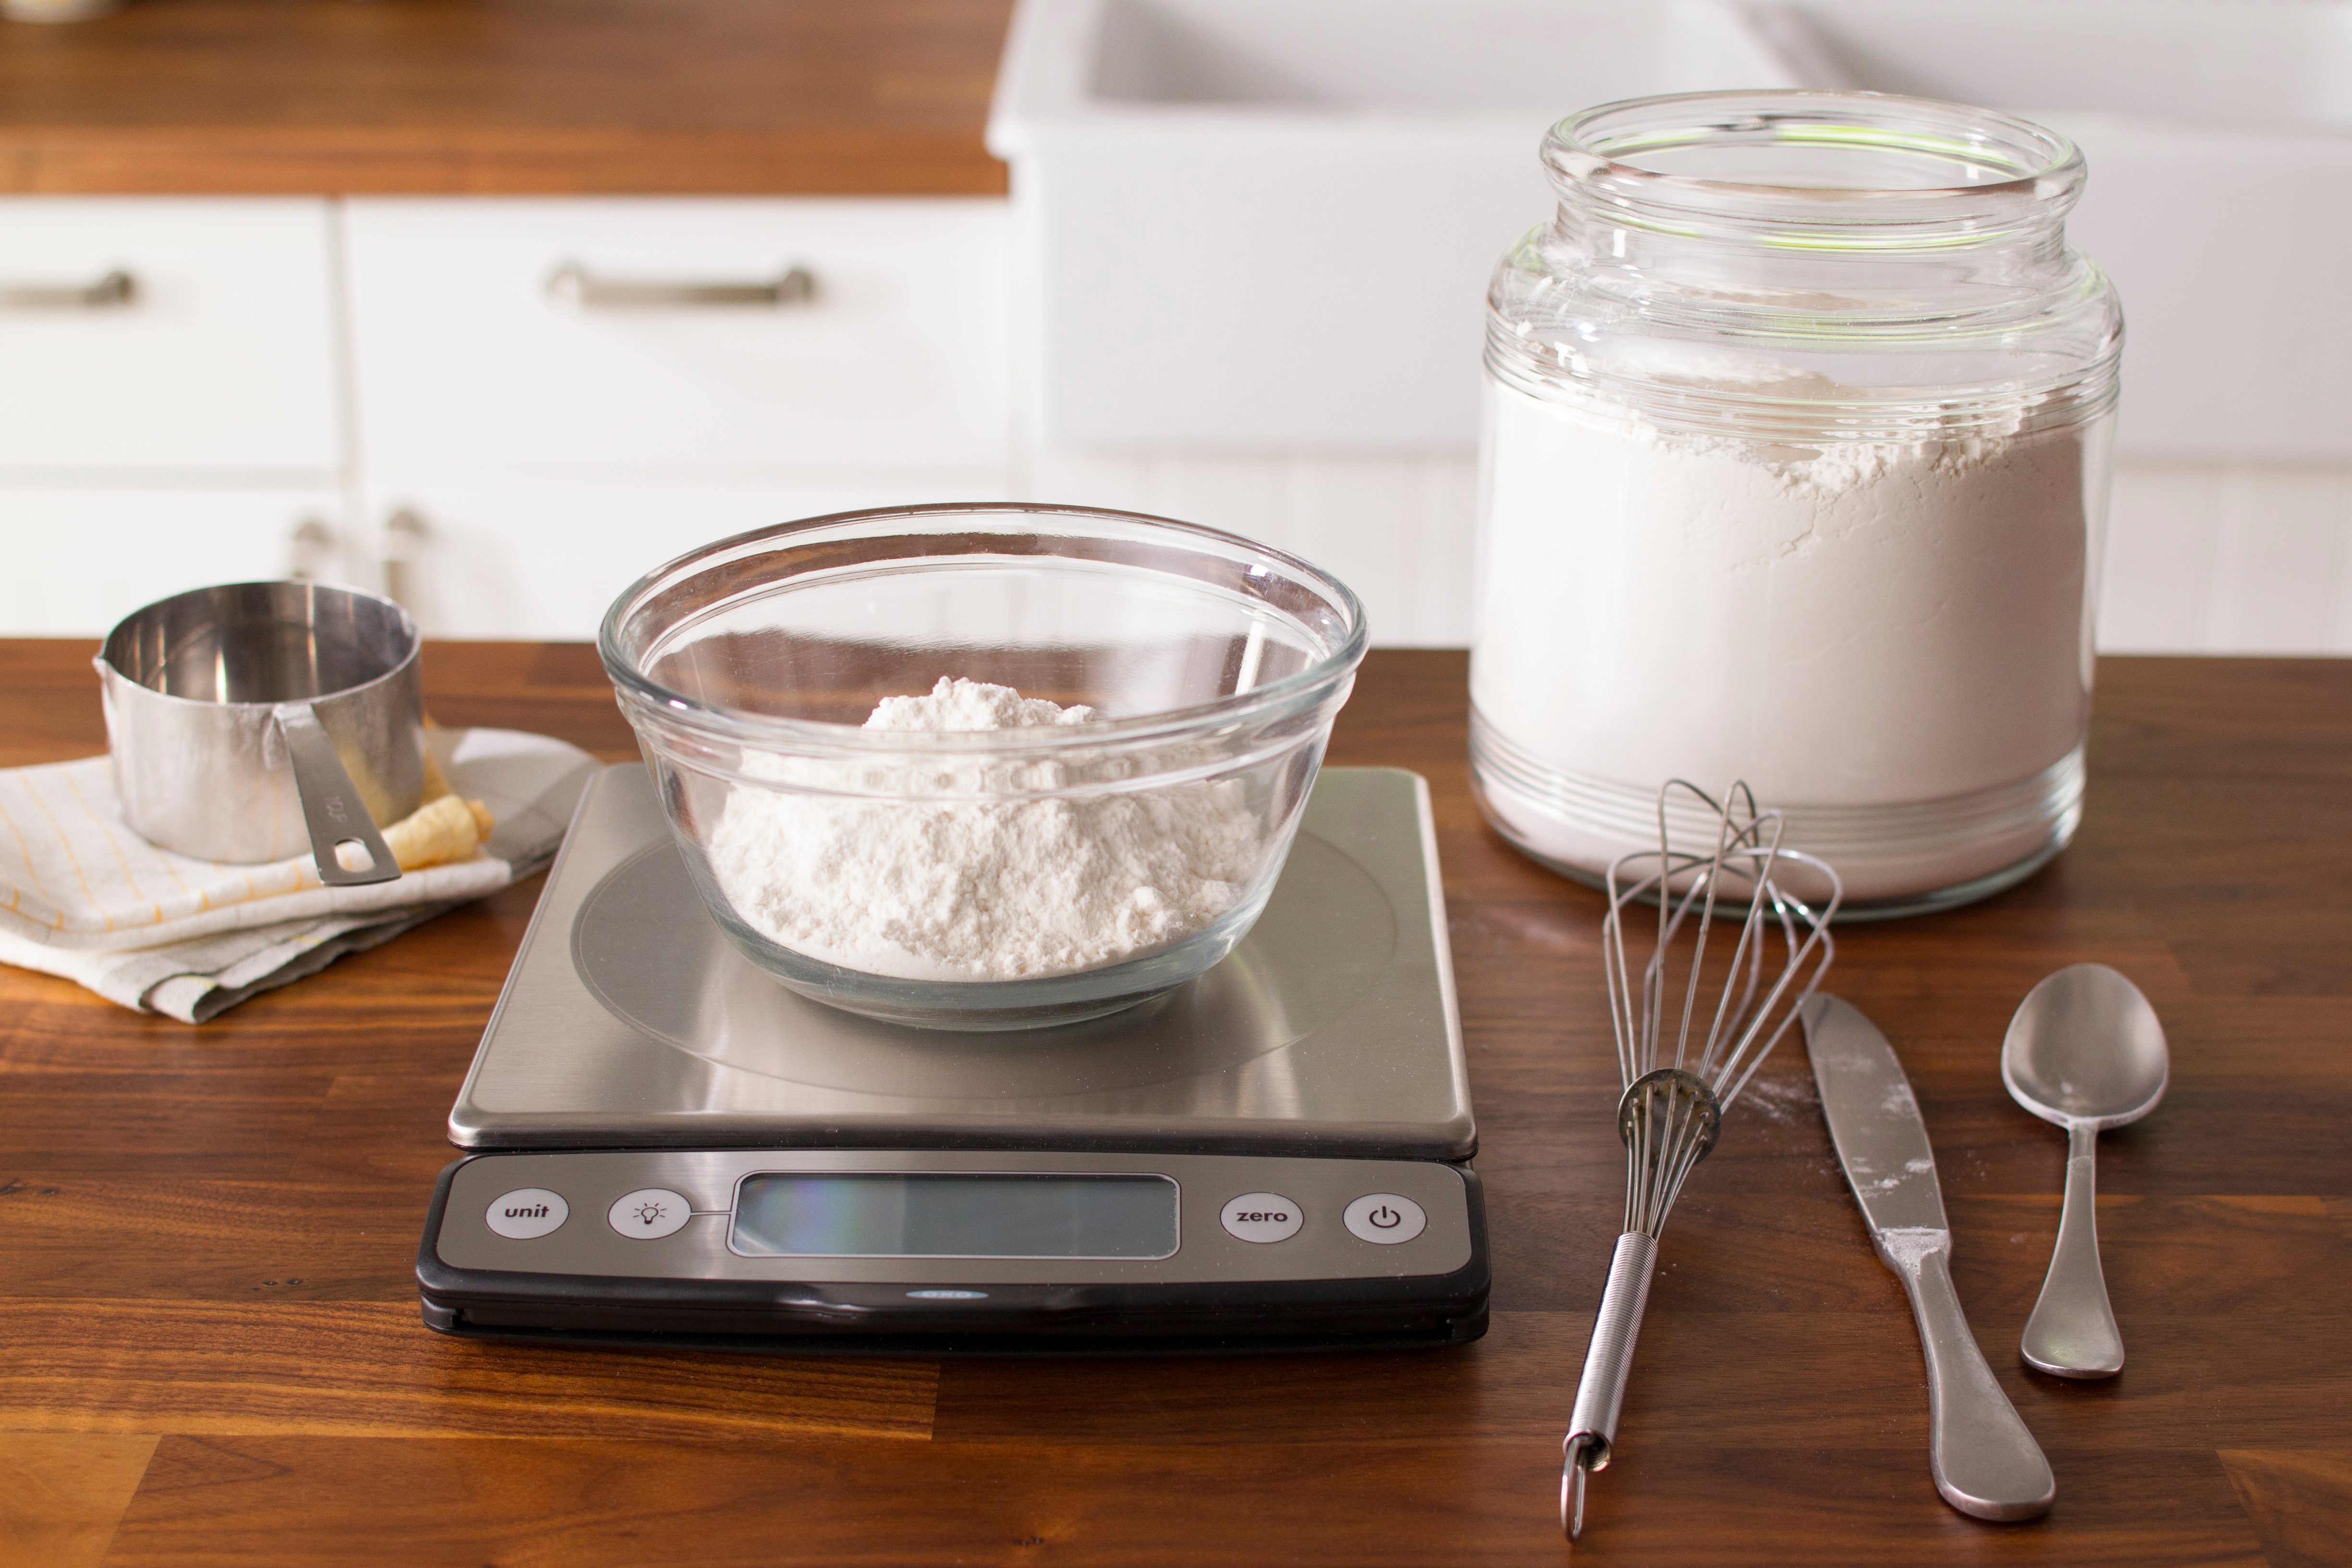 Measuring Flour Into Kitchen Scales Stock Photo, Picture and